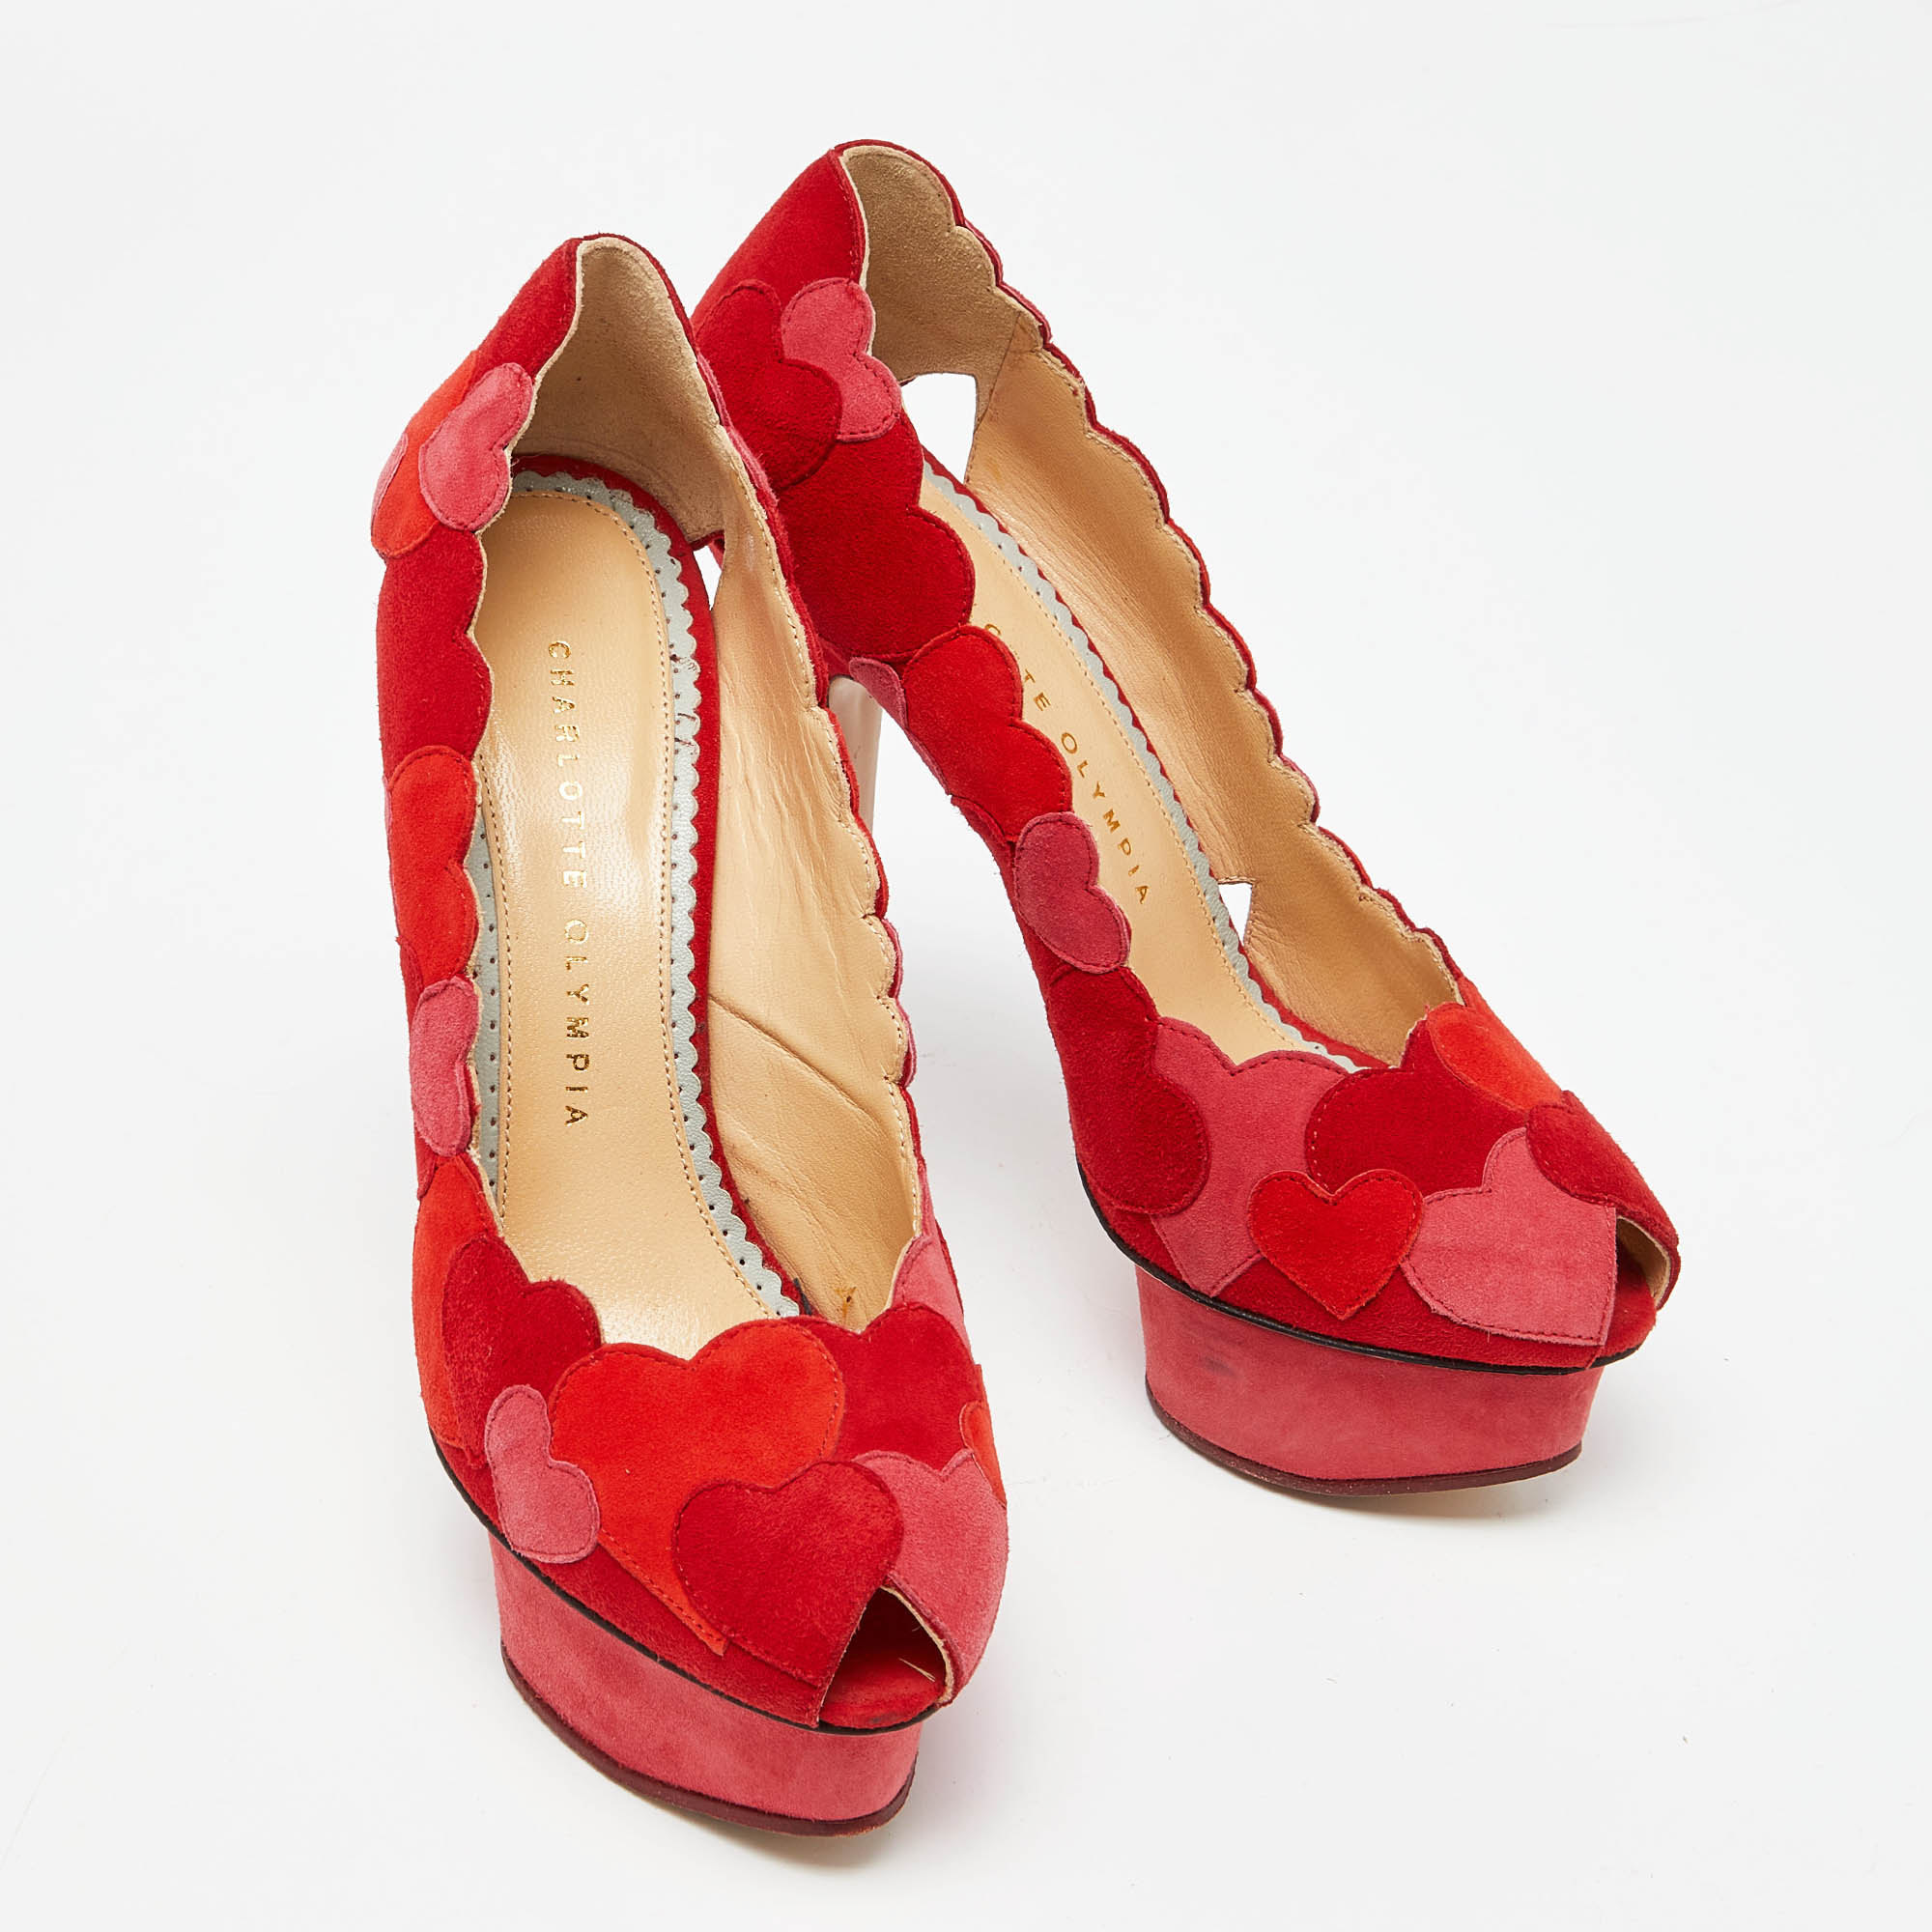 Charlotte Olympia Red/Pink Suede Love Me Heart Appliqued Dolly Pumps Size 36.5